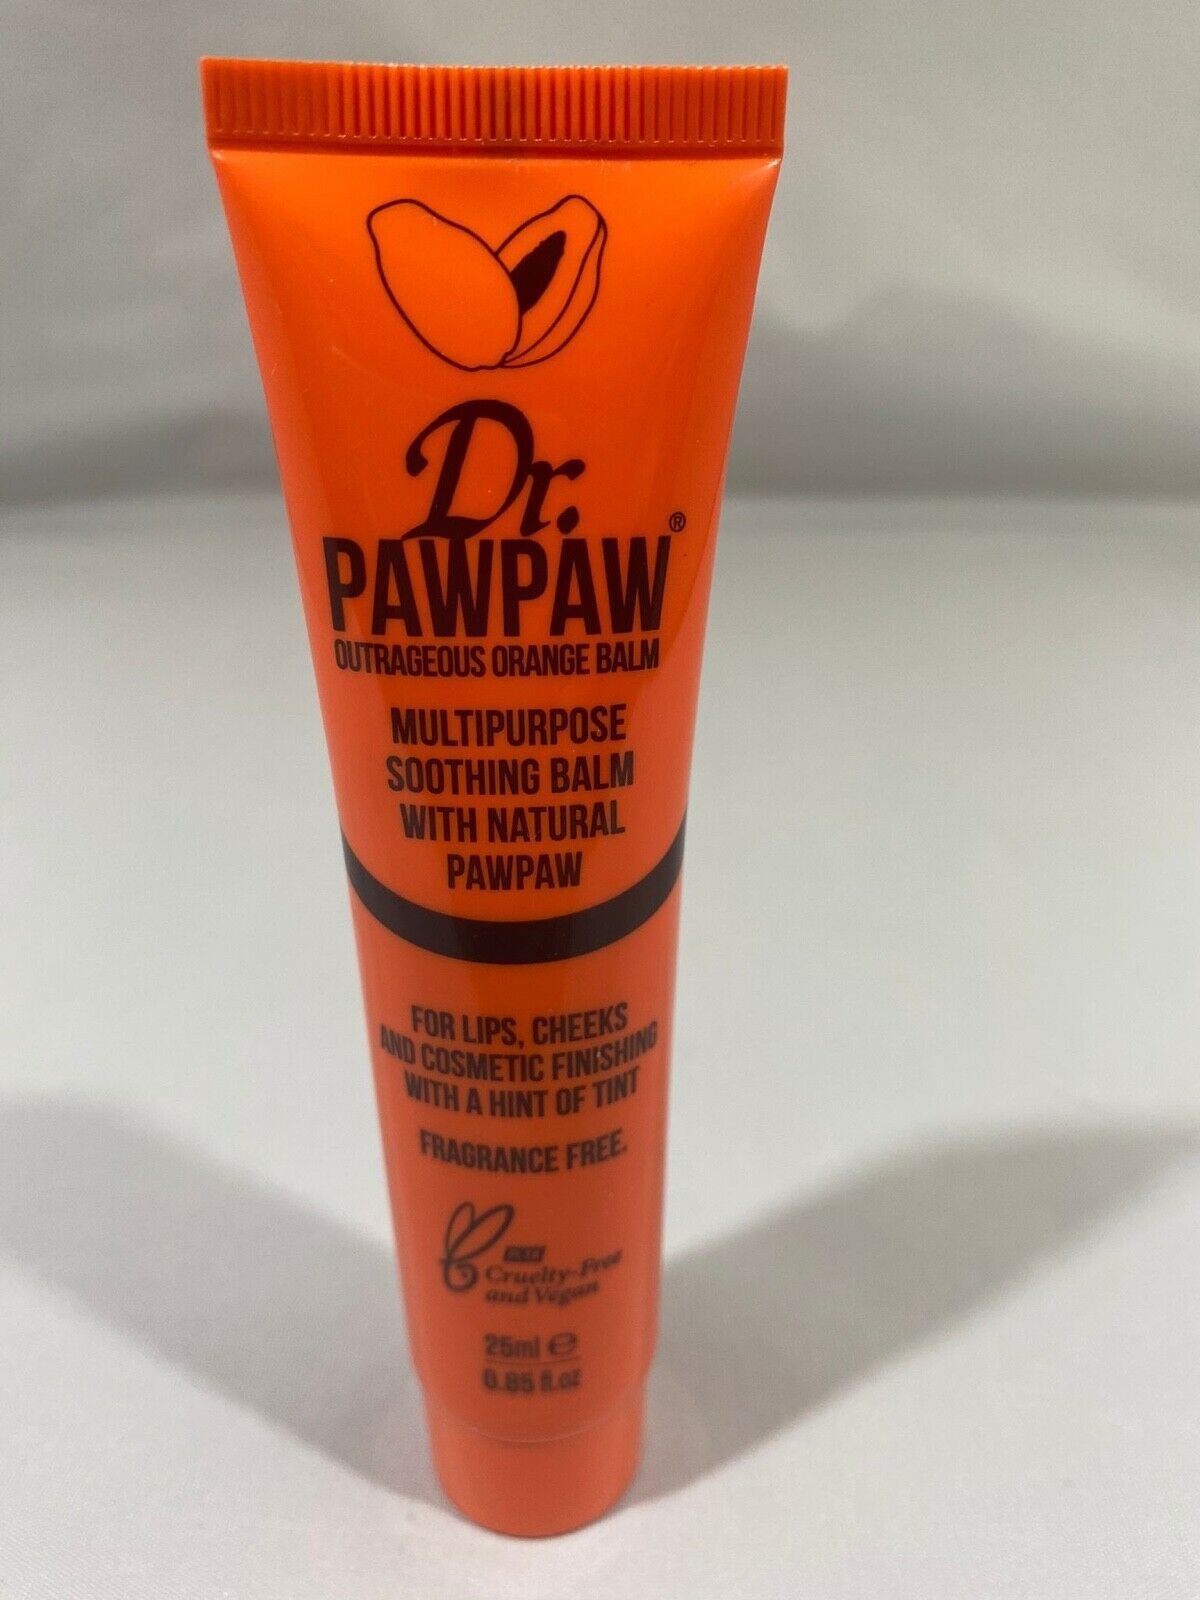 Dr. Pawpaw Multipurpose Soothing Balm with Natural PawPaw -  Outrageous Orange